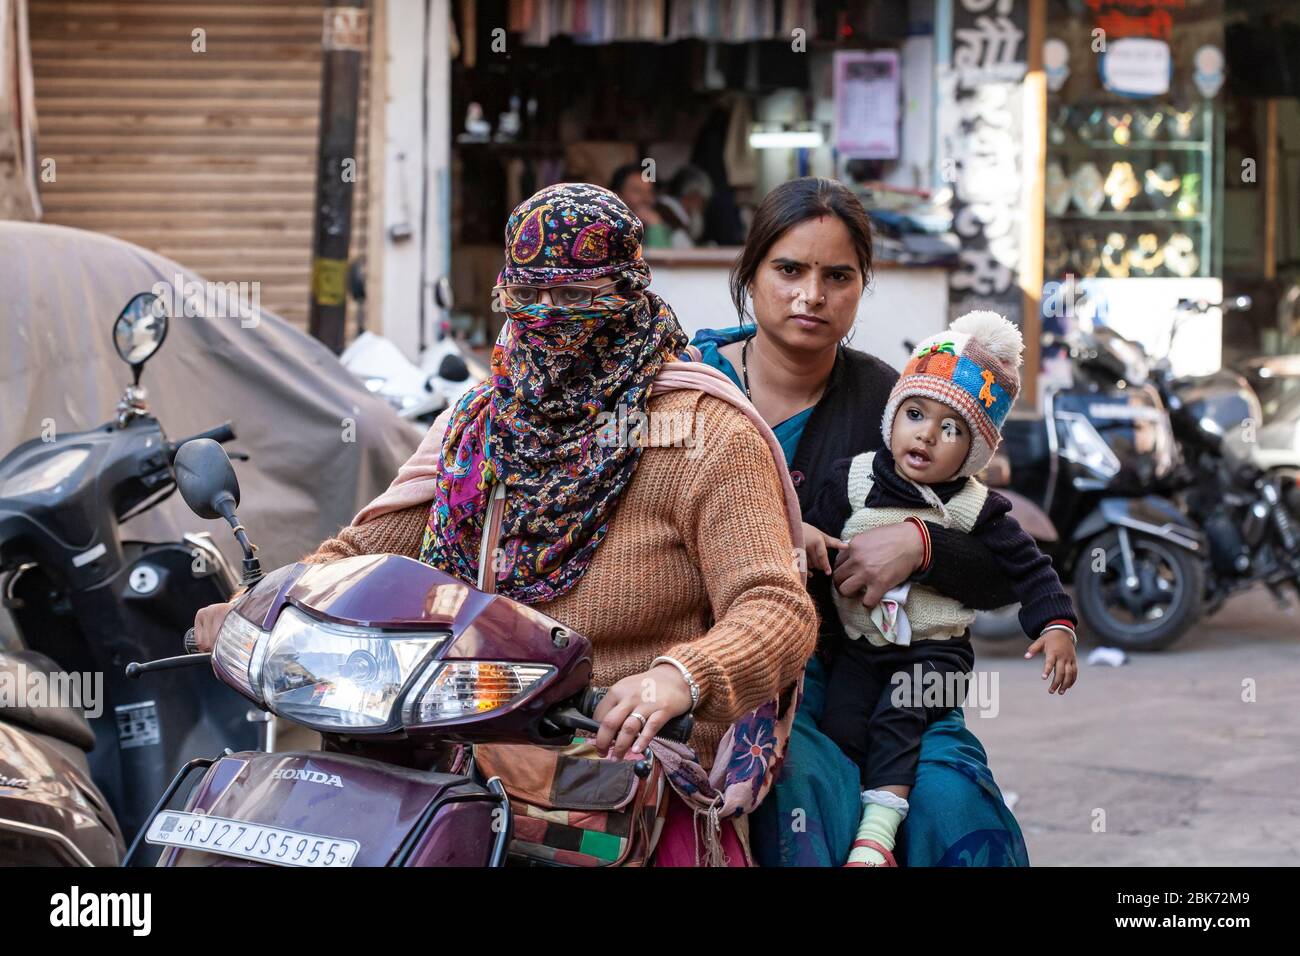 Udaipur city in India, February 8, 2018: Woman in scarf riding a motorbike in Udaipur center Stock Photo